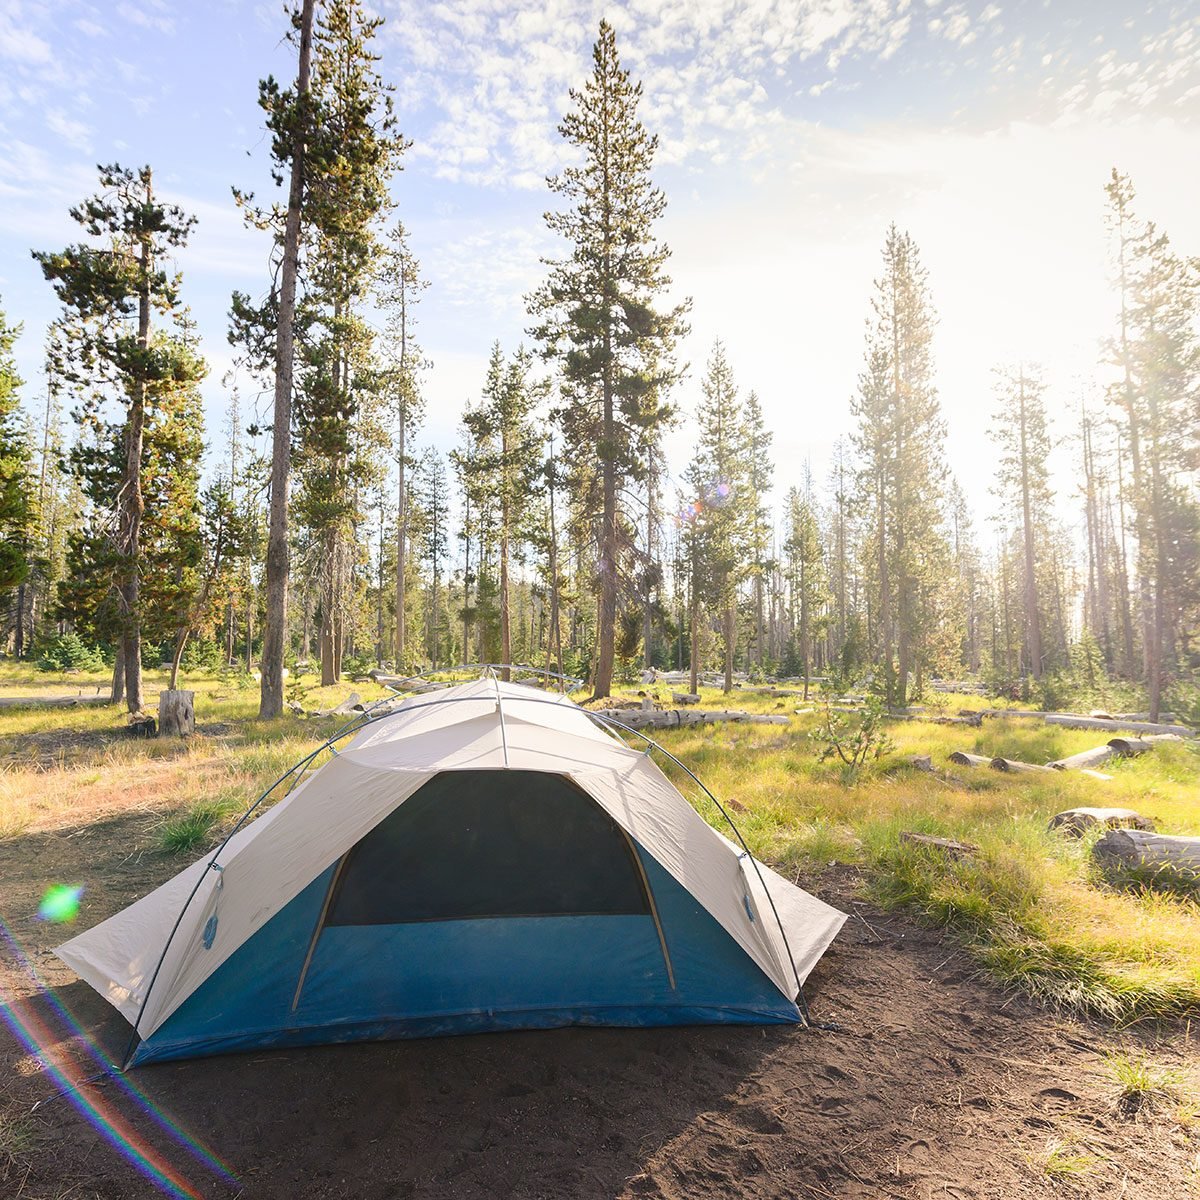 How Hot Is Too Hot for Camping?